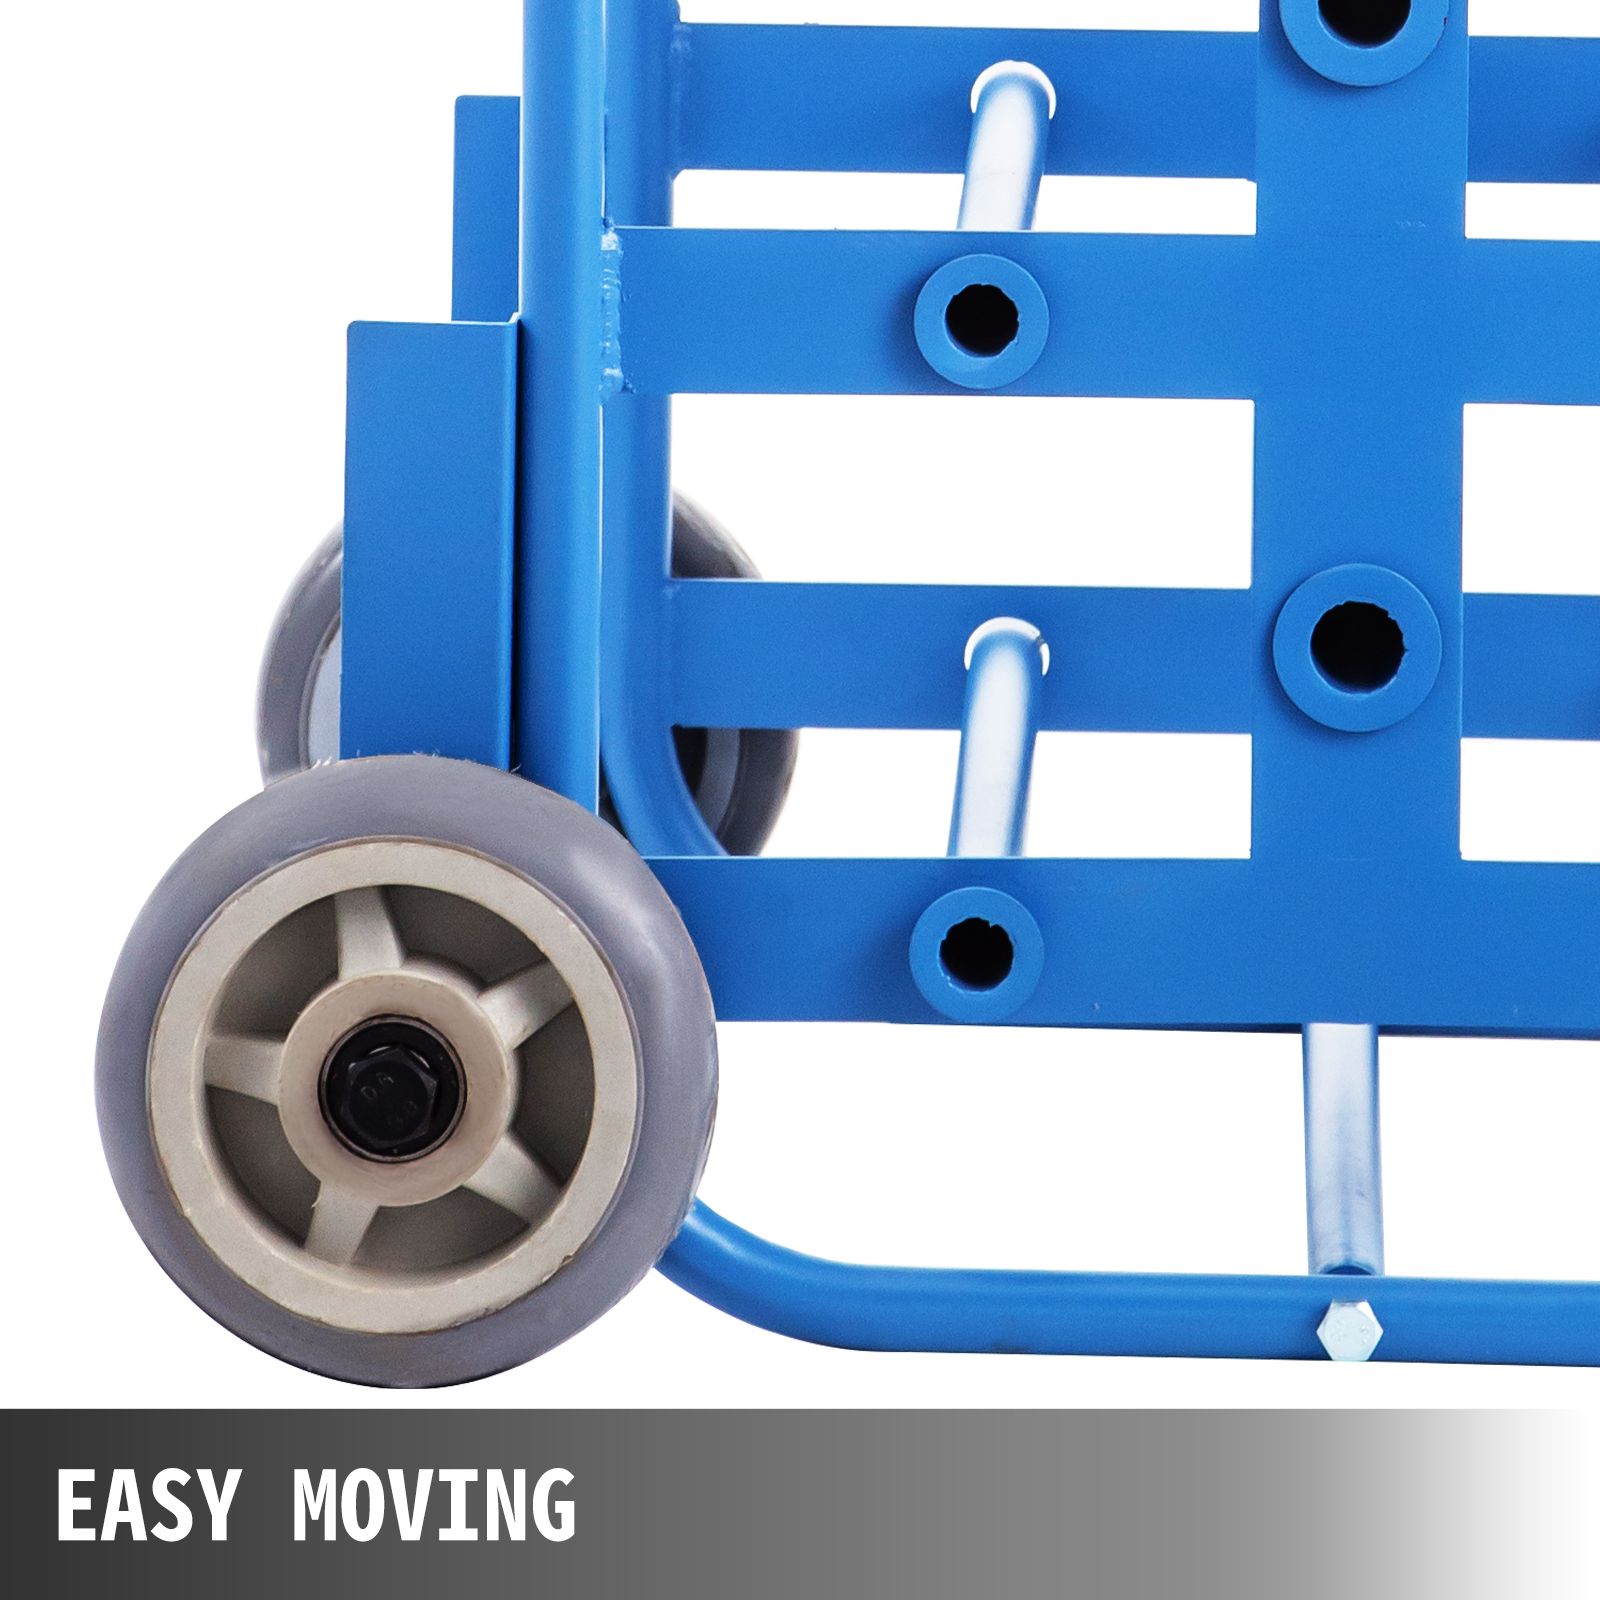 Wire Reel Caddy Wire Spool Rack 1’’& 4/5’’Multiple Axles Cable Caddy in Blue eBay